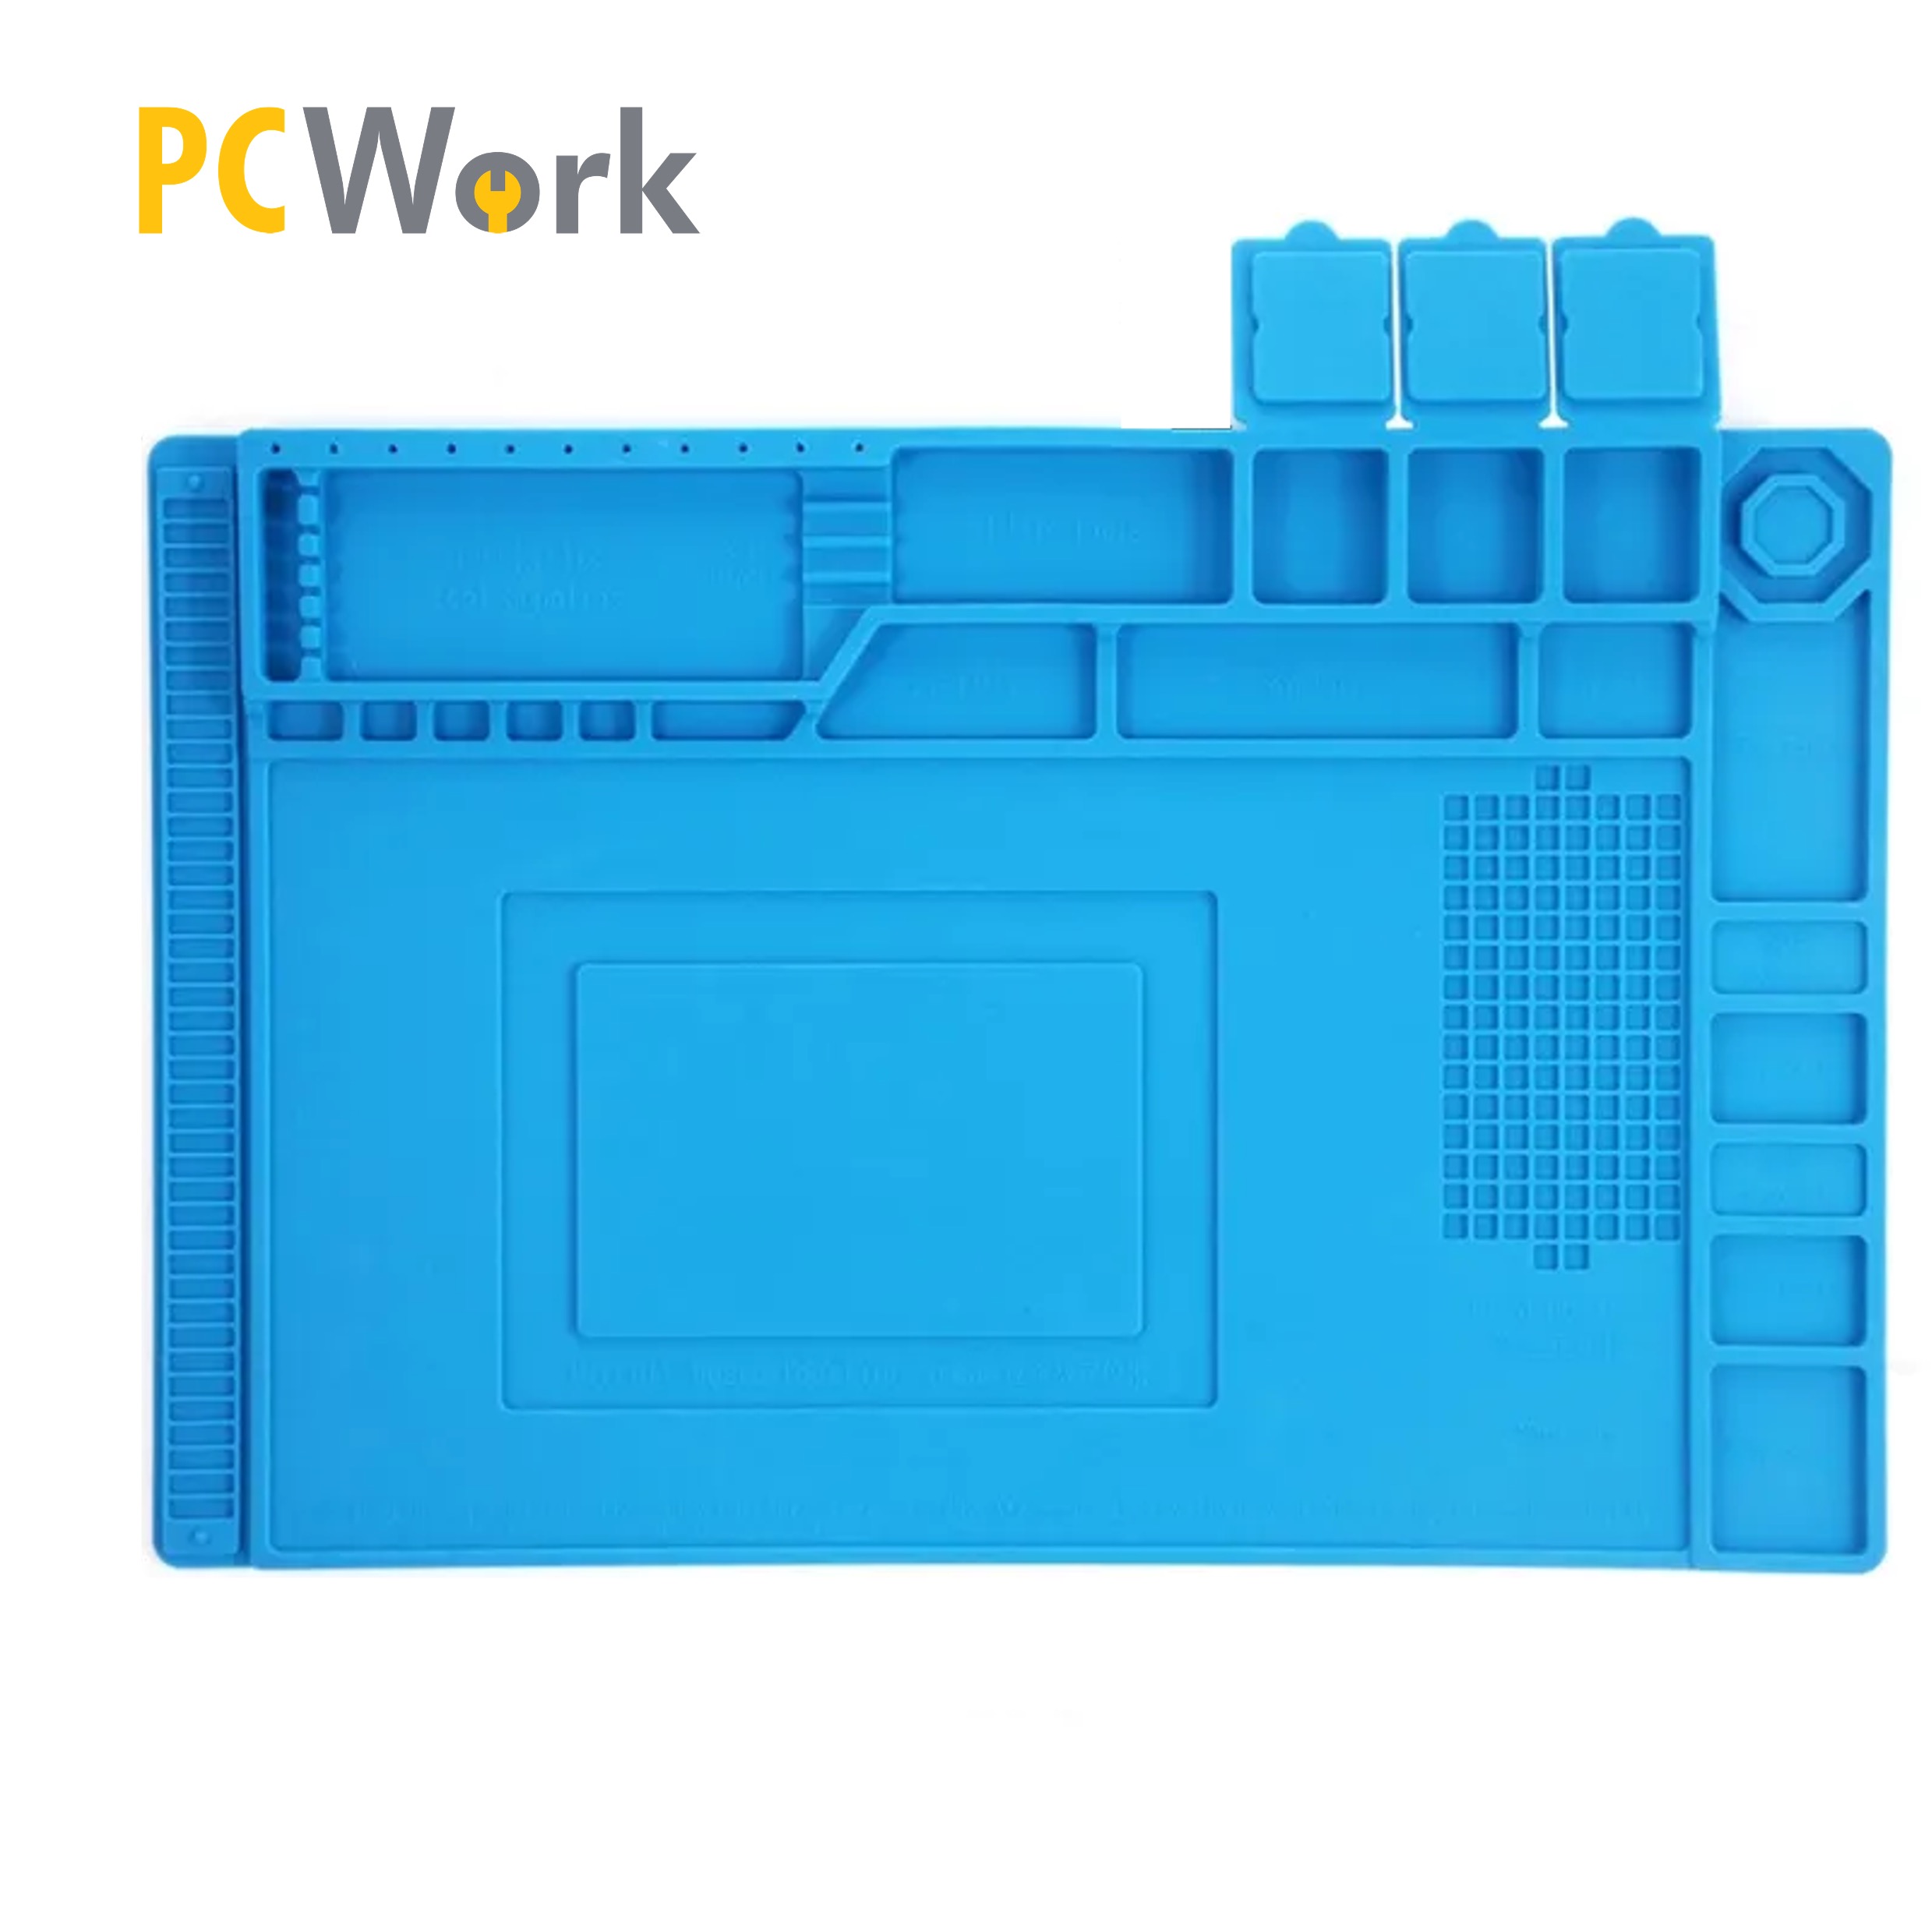 PCW10A Soldering mat 450x300mm with storage boxes, magnetic, silicone